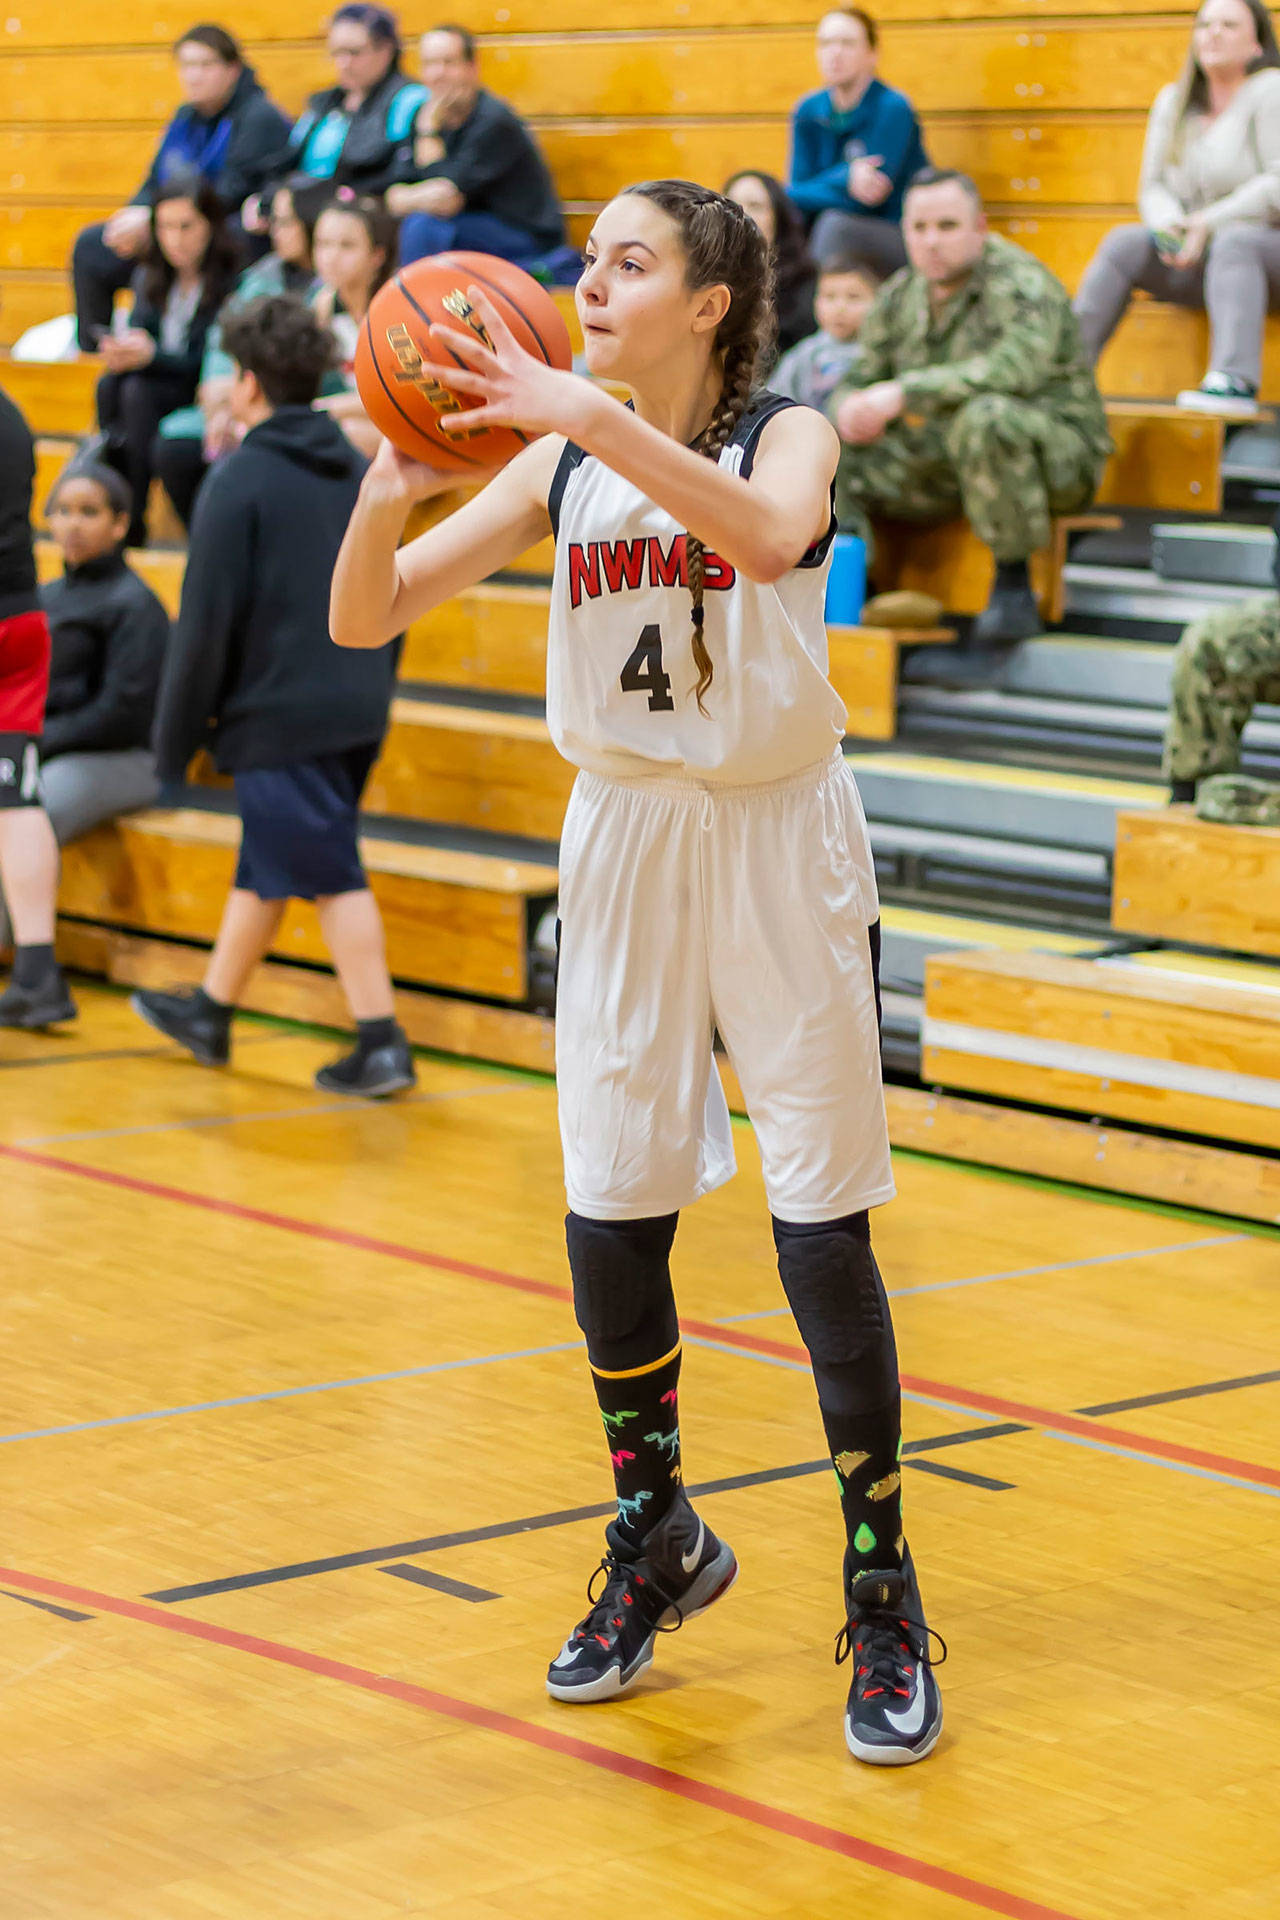 Analeah White puts up a three-point shot in the seventh-grade game.(Photo by John Fisken)